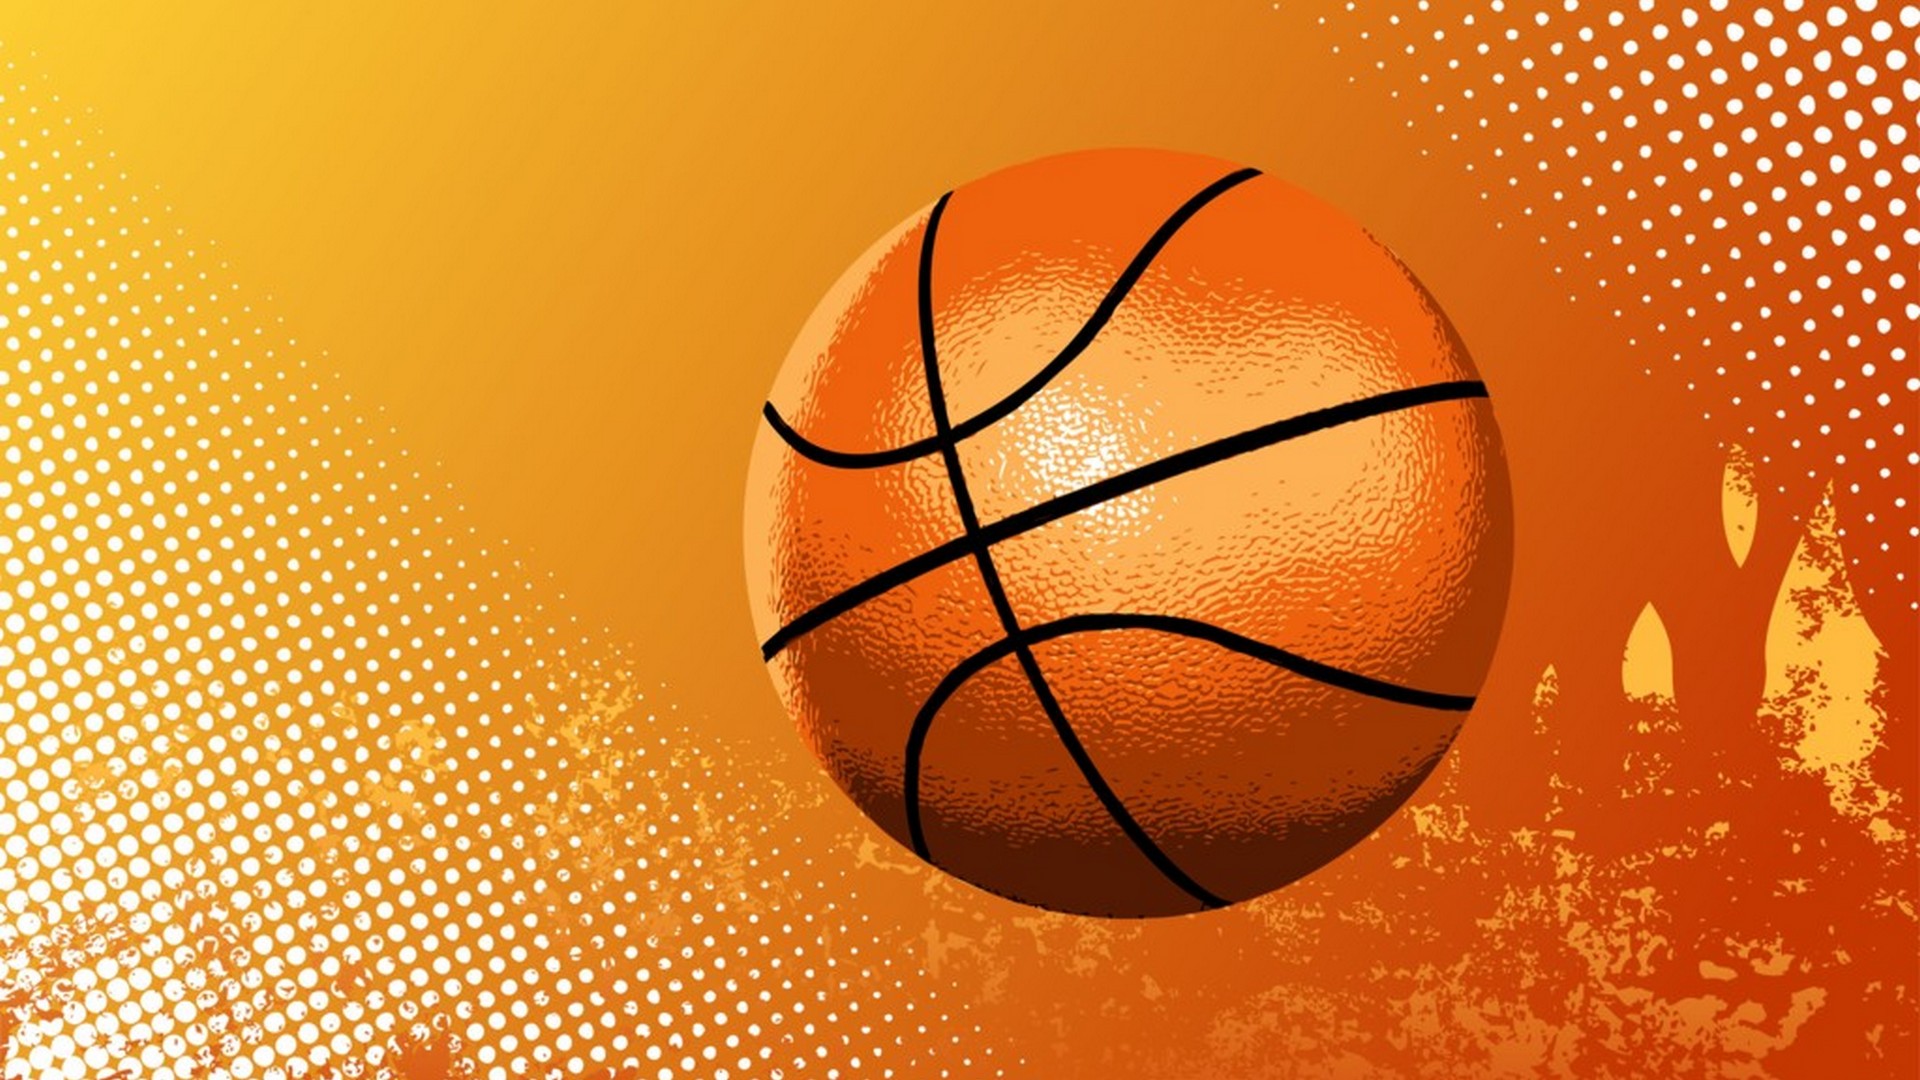 Basketball Games Wallpaper with image dimensions 1920x1080 pixel. You can make this wallpaper for your Desktop Computer Backgrounds, Windows or Mac Screensavers, iPhone Lock screen, Tablet or Android and another Mobile Phone device